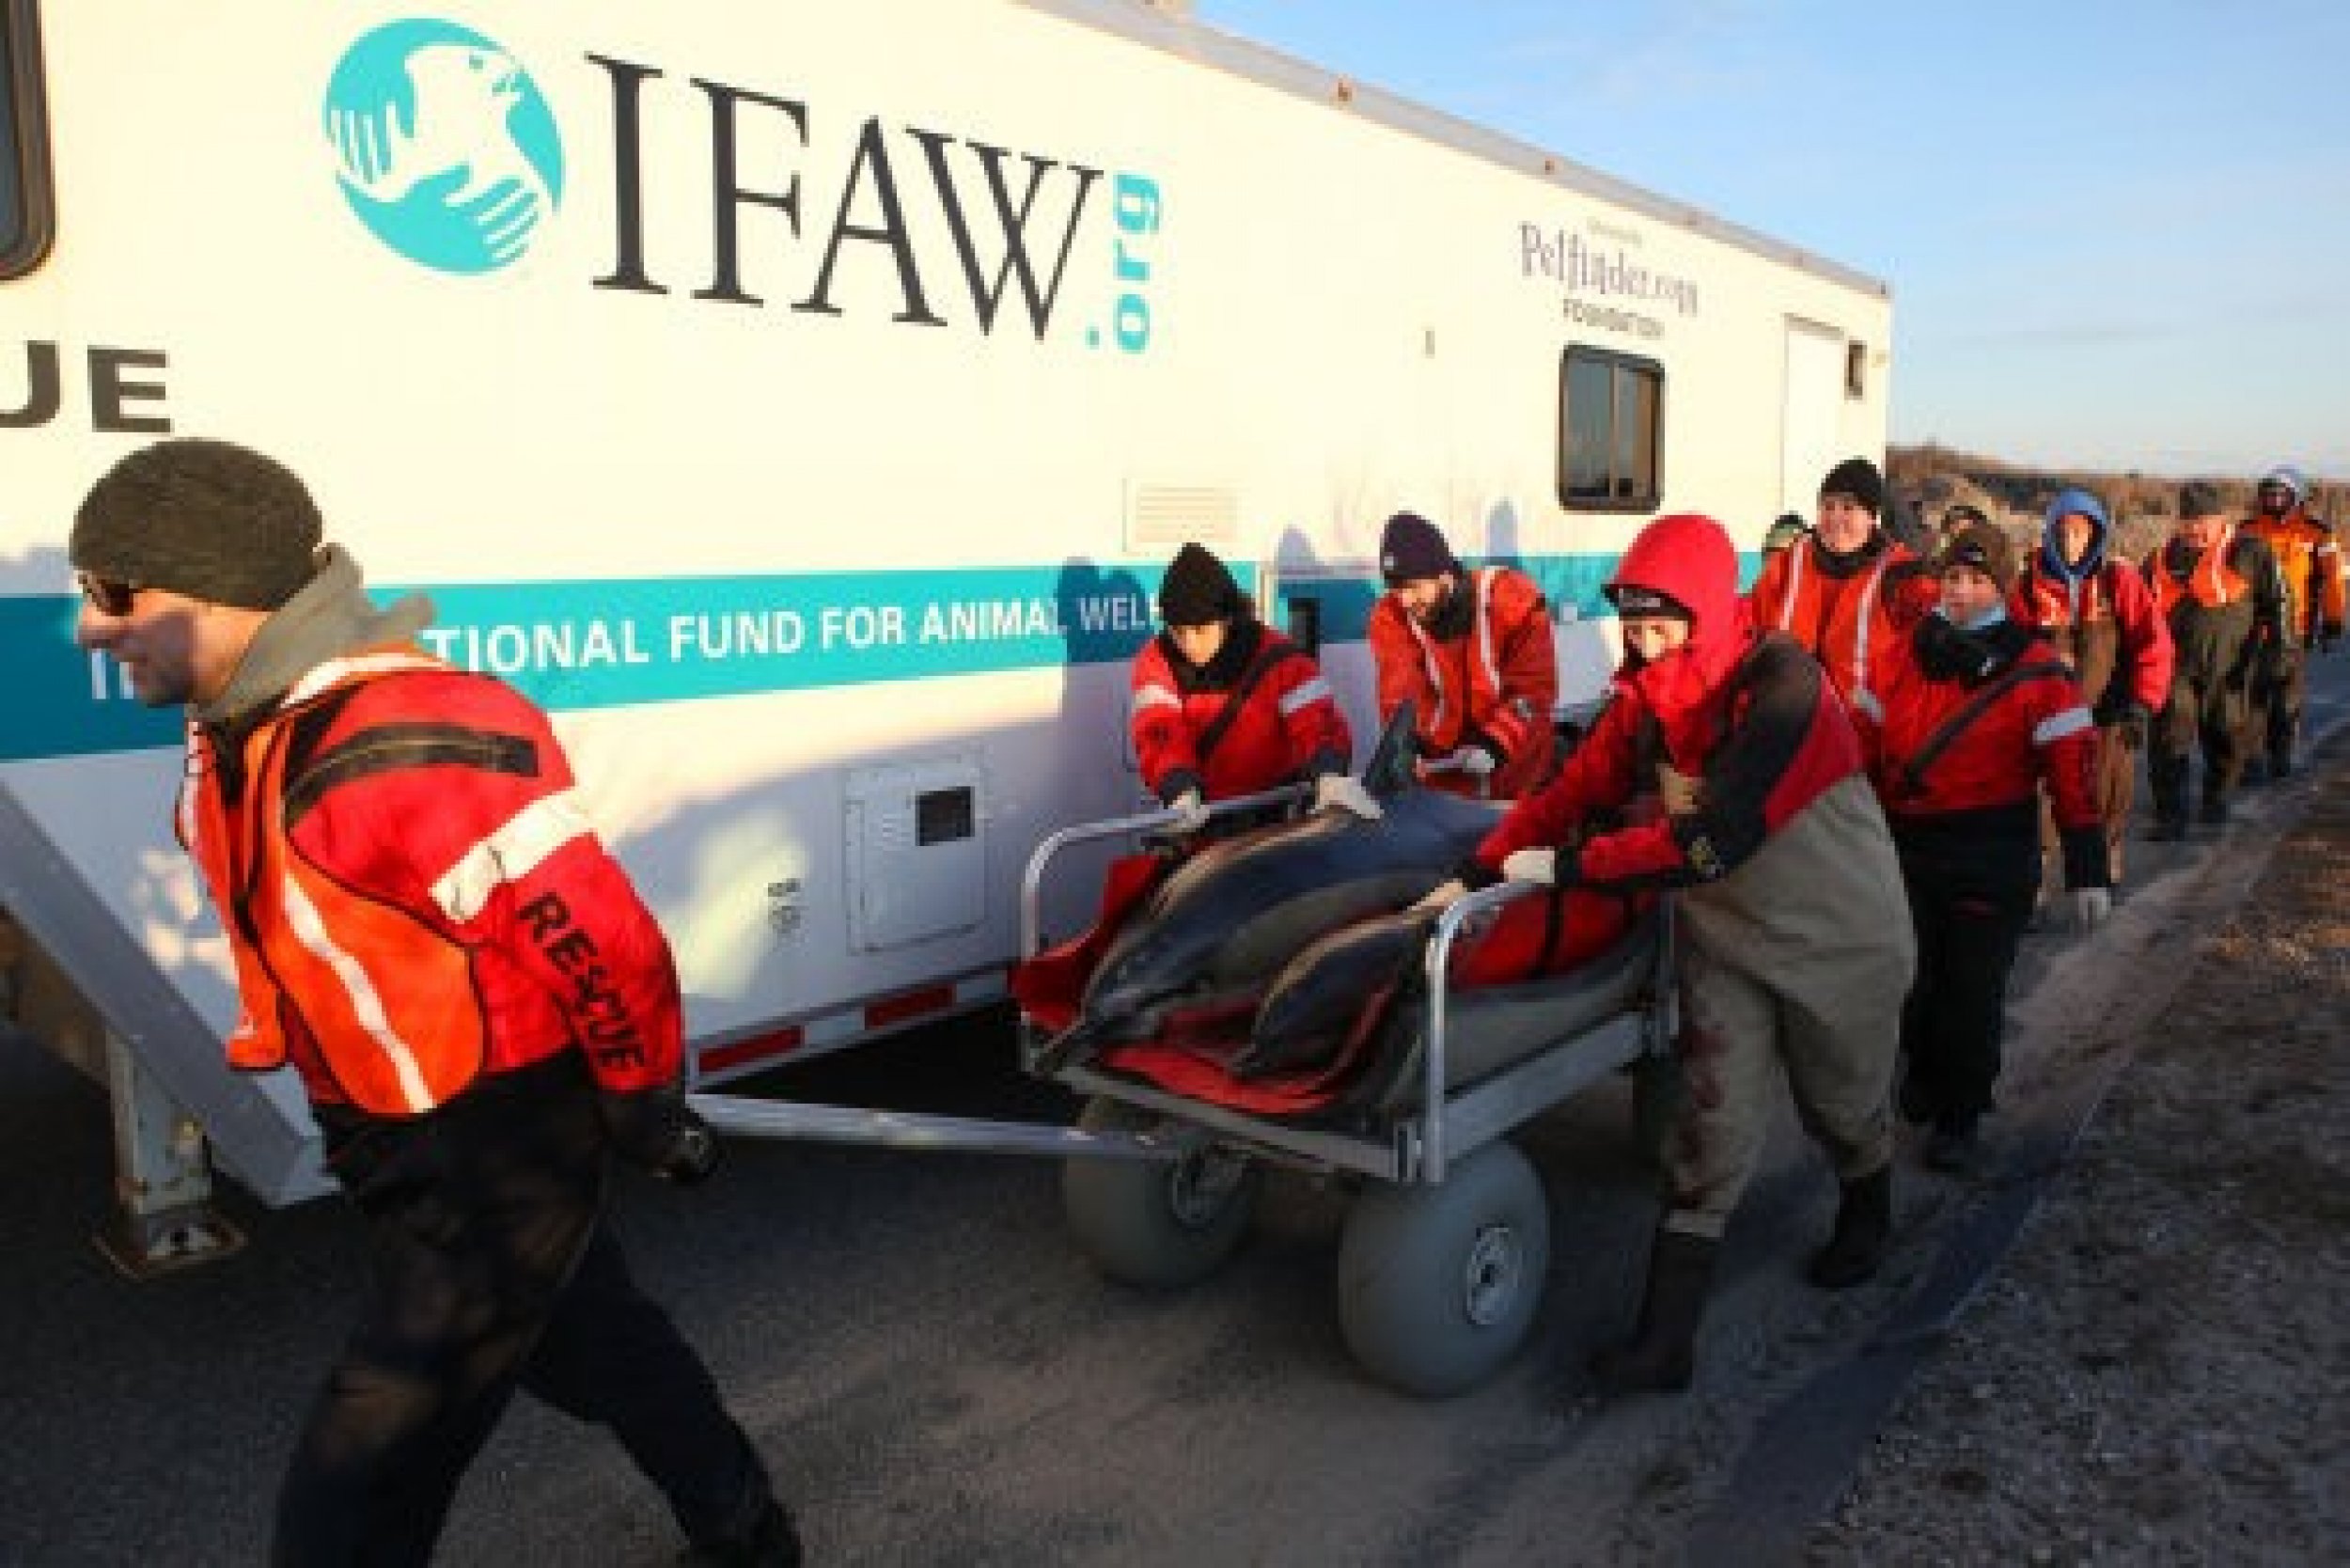 A mother and calf common dolphin are transported to the beach by a team from the International Fund for Animal Welfare IFAW and the New England Aquarium before being released back into Cape Cod Bay at Scusset Beach, in Sagamore Beach, Mass.